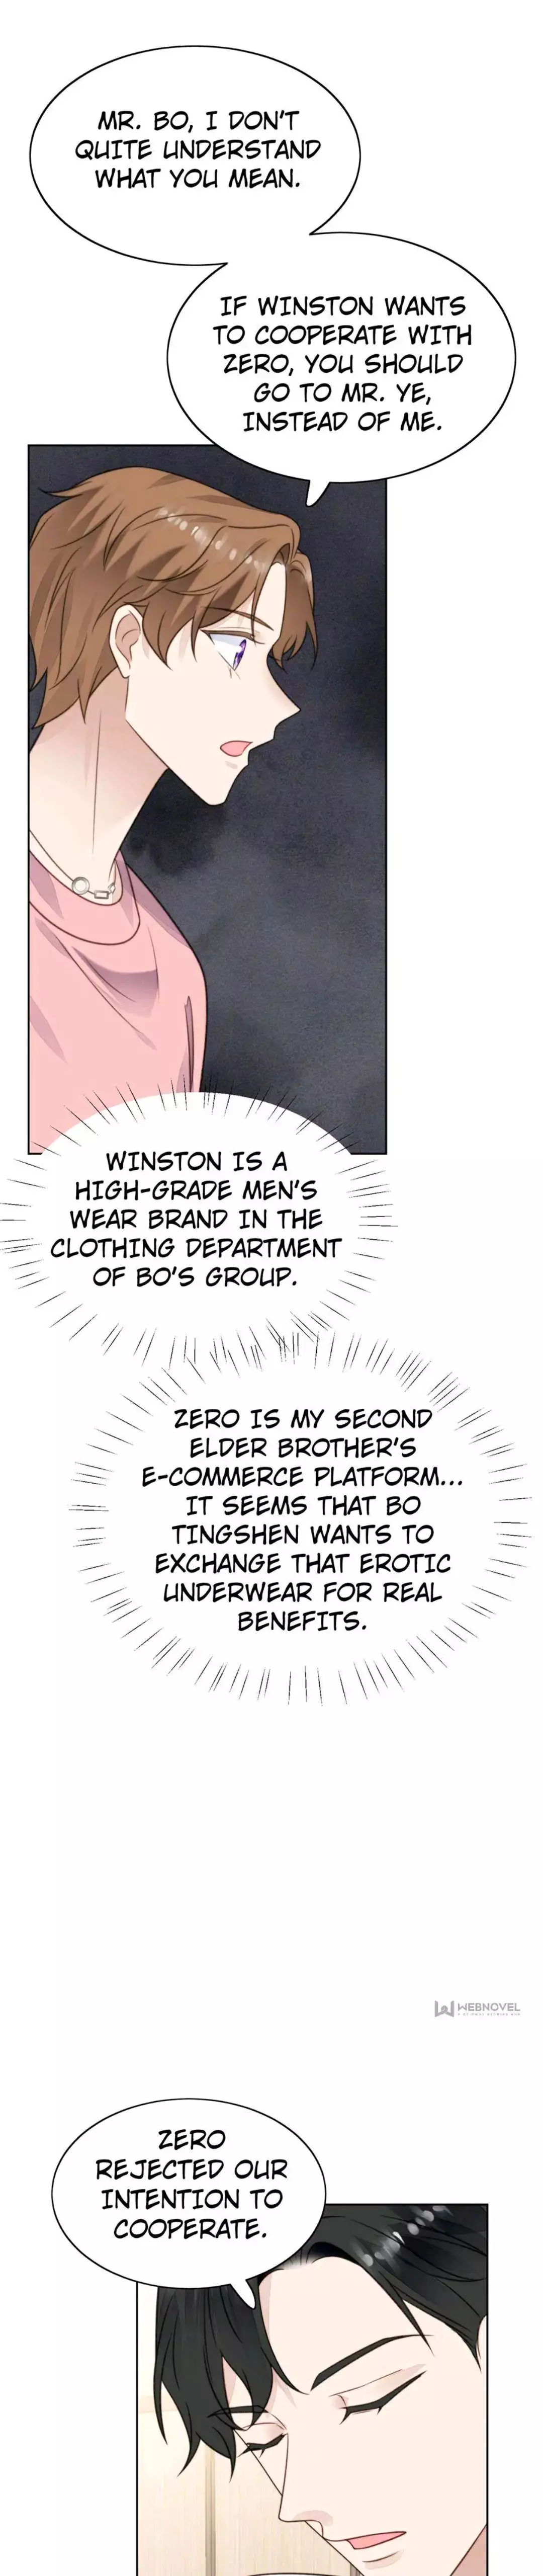 Boss Makes The Boy Group’S Center Of Me - 12 page 18-a7210d55